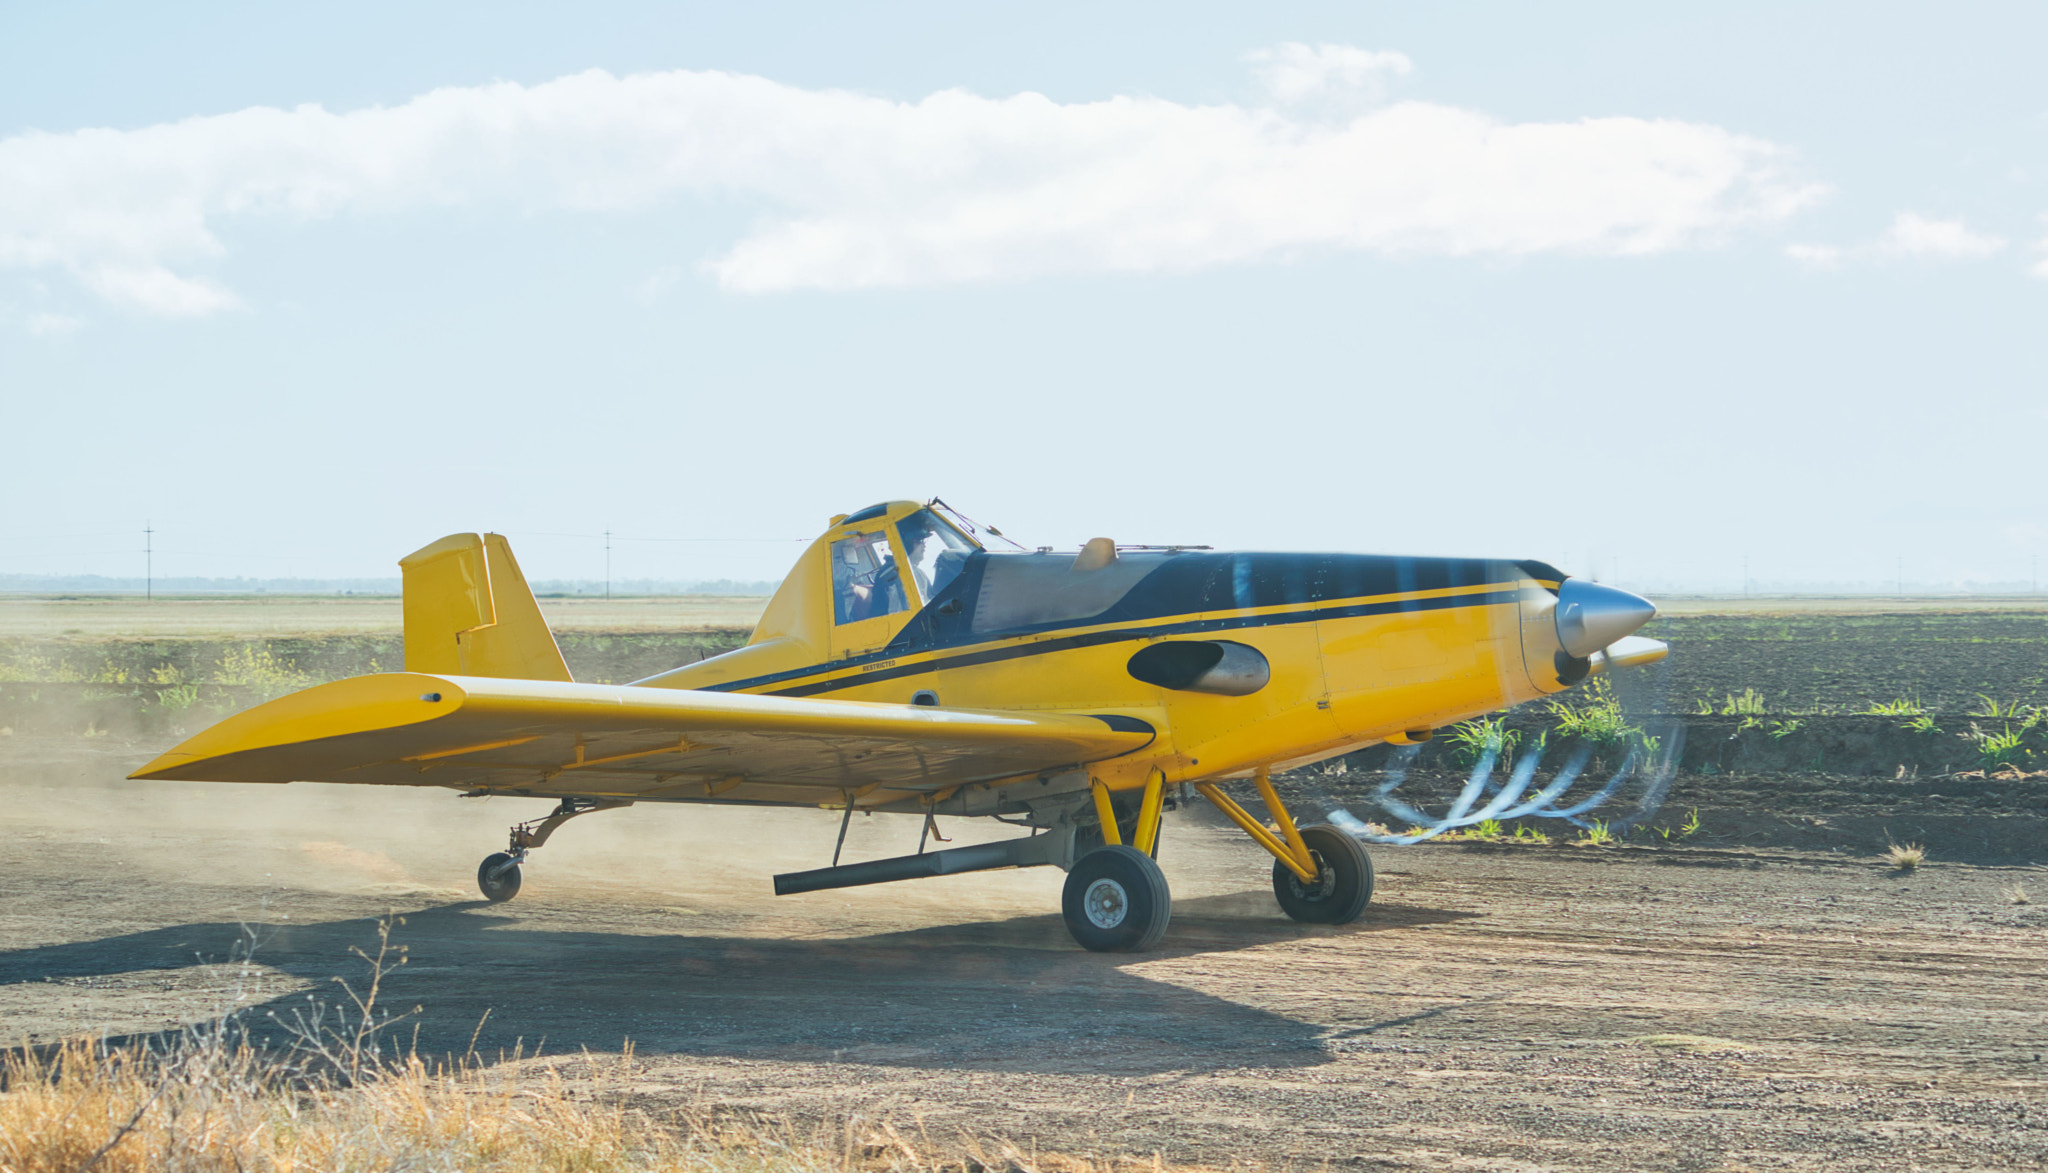 Sony a7 II sample photo. Air tractor photography